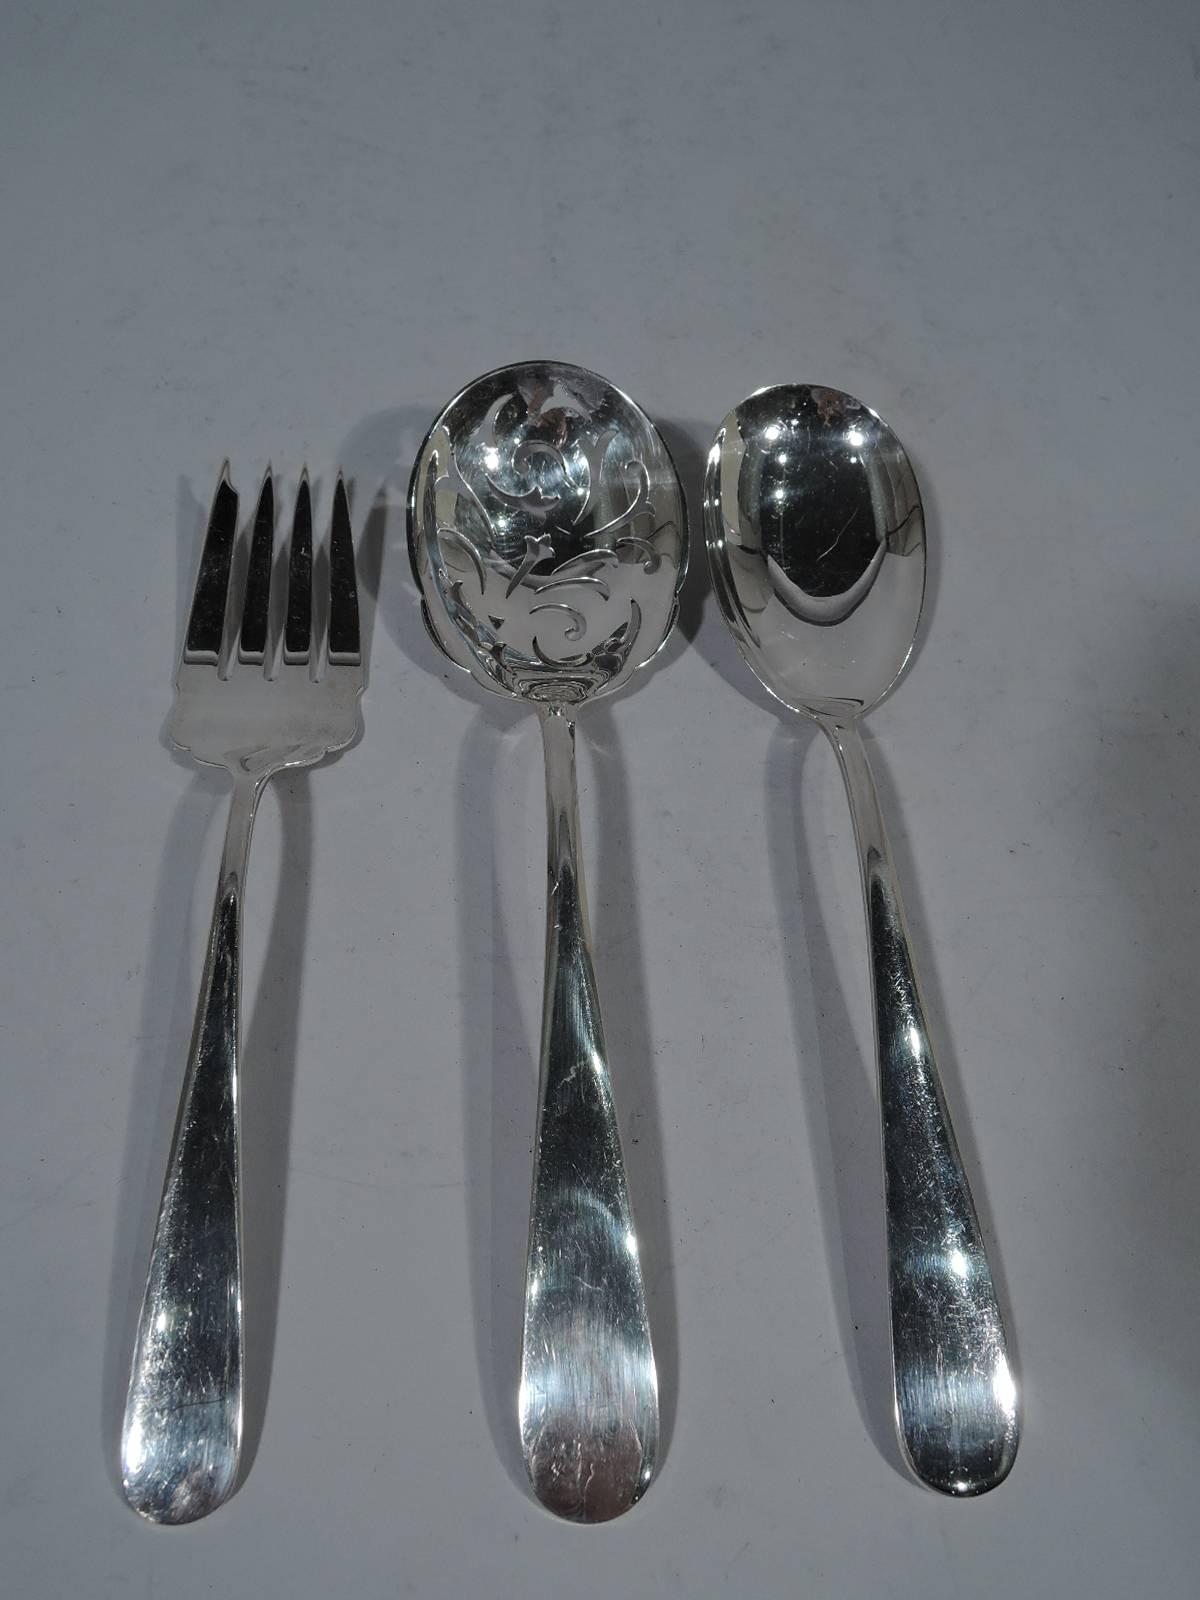 Sterling silver dinner service in Old Maryland Plain pattern. Made by S. Kirk & Son in Baltimore. This set comprises 72 pieces (all dimensions in inches): Knives: 11 dinner knives (9 5/8) and 10 butter spreaders (6 1/8); Forks: 12 dinner forks (7